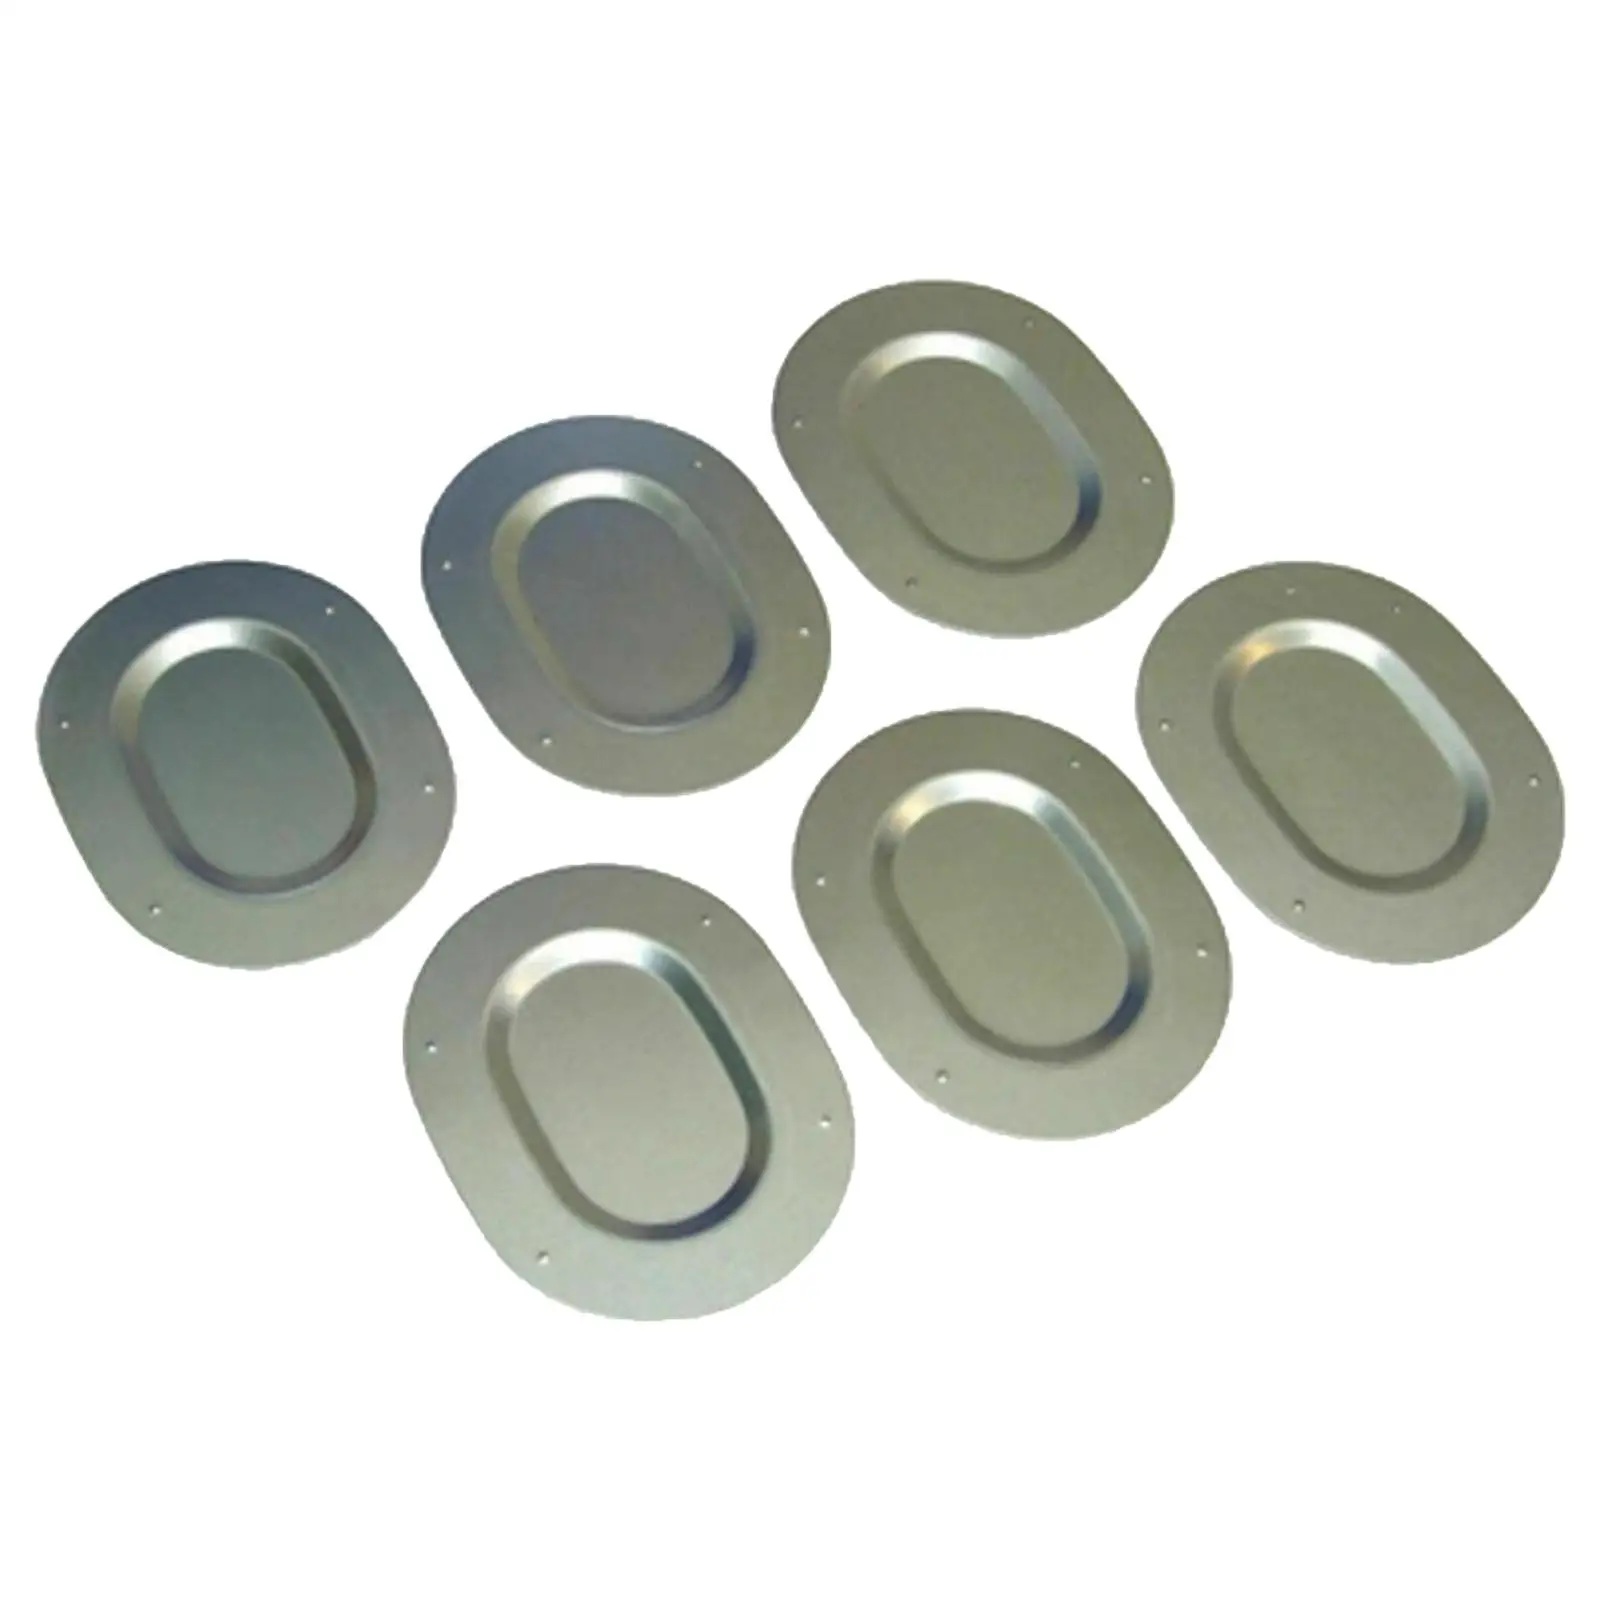 6Pcs Trunk Floor Pan Drain Plugs Set Floor and Trunk Pan Body Metal Automotive Replacement Parts Fit for  A-Body